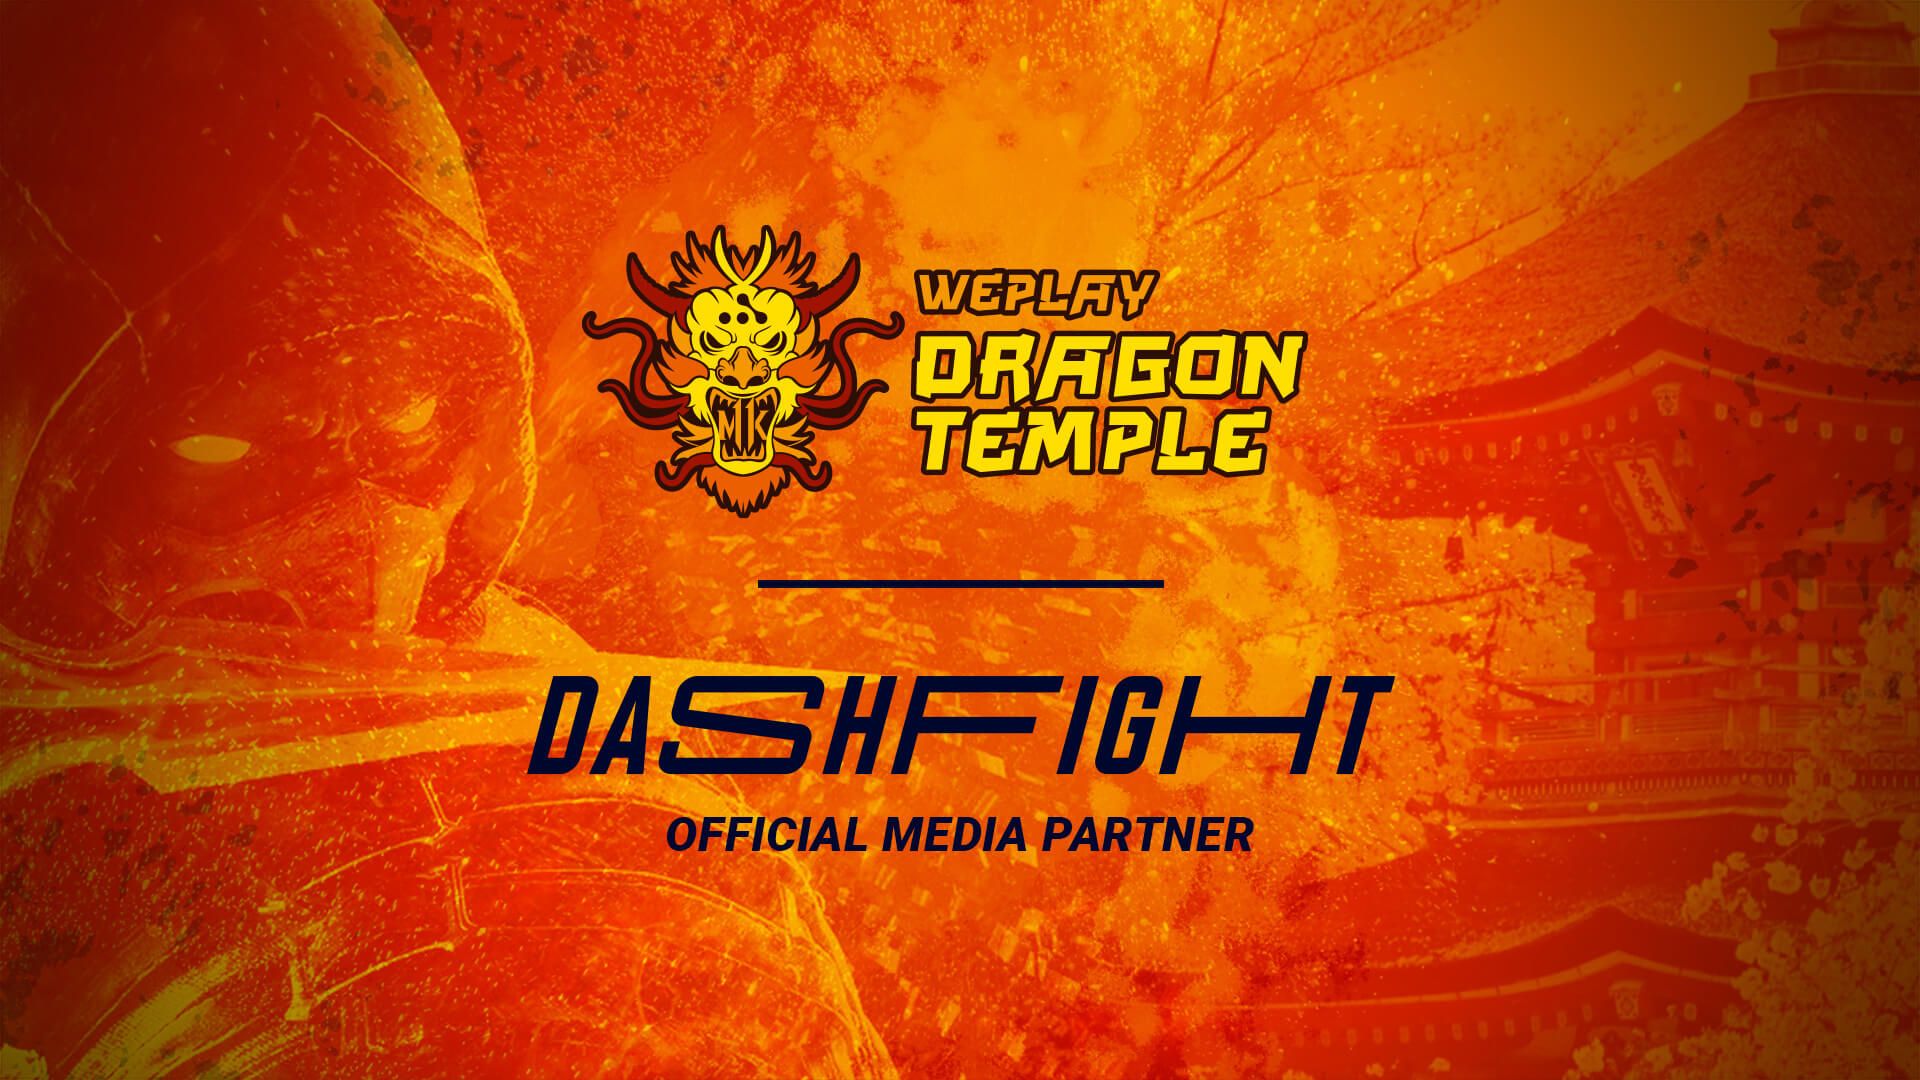 DashFight is the Official Media Partner for the WePlay Dragon Temple